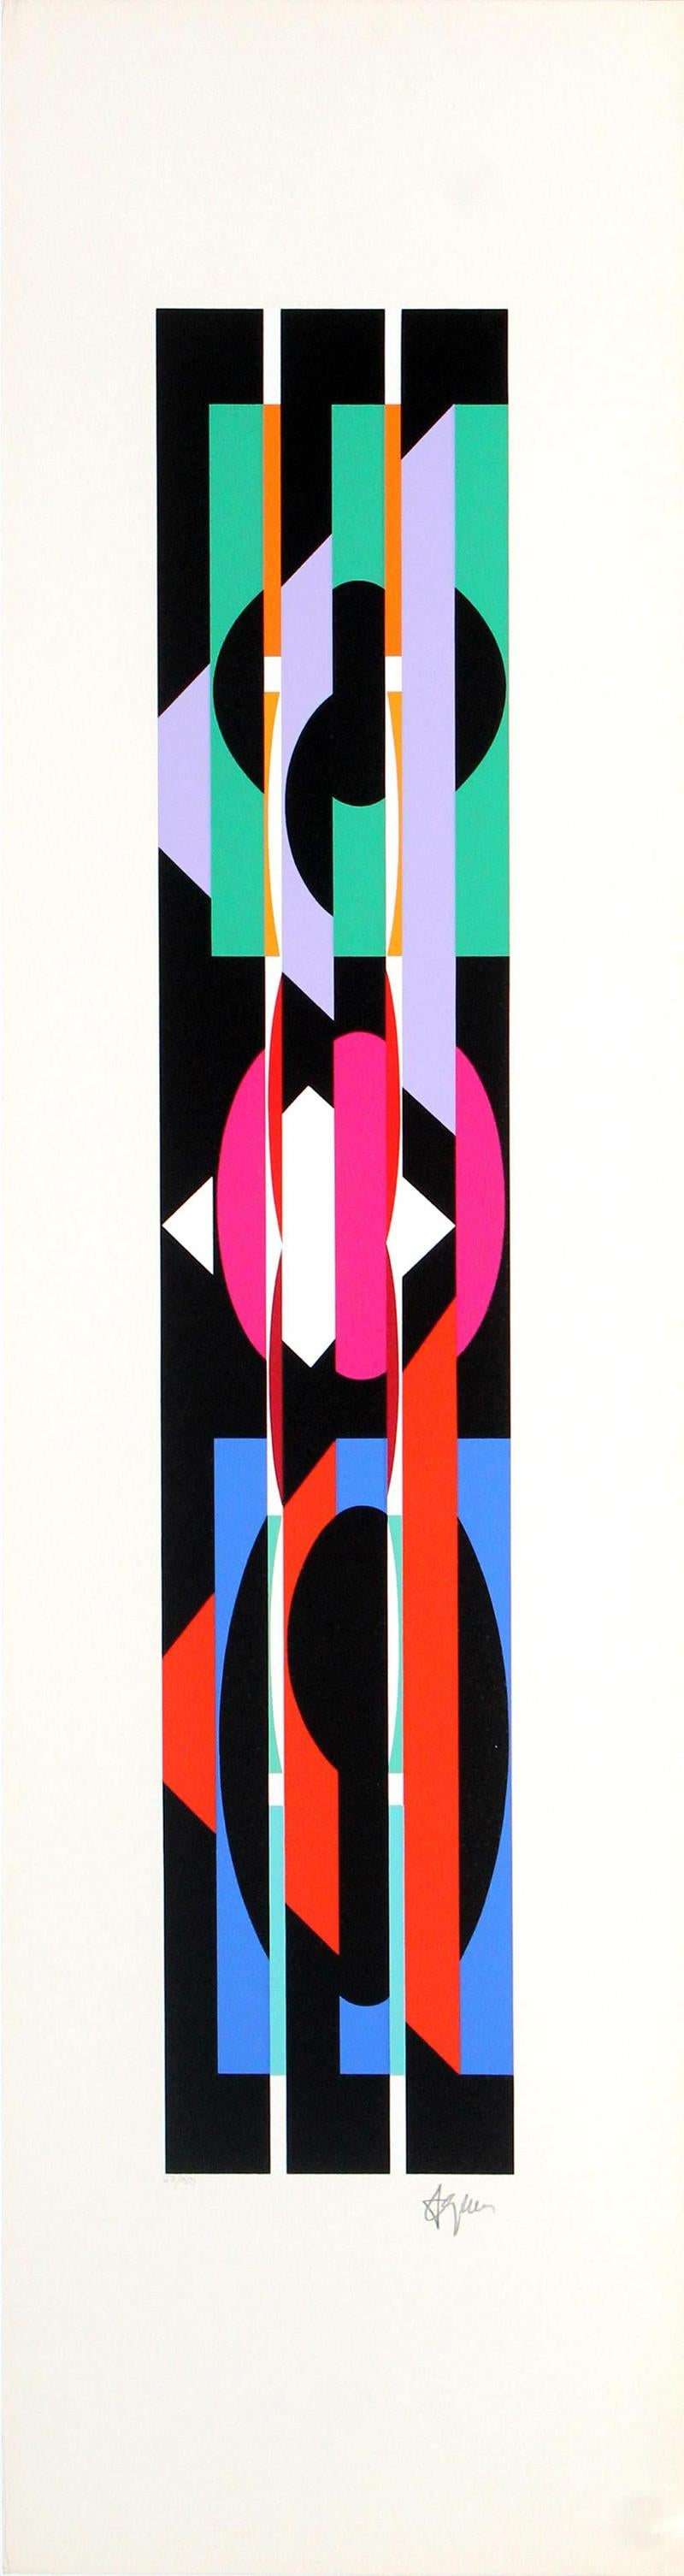 Yaacov Agam Abstract Print - YAACOV AGAM  UNTITLED 4 FROM THE +-X9 SUITE  SIGNED AND NUMBERED